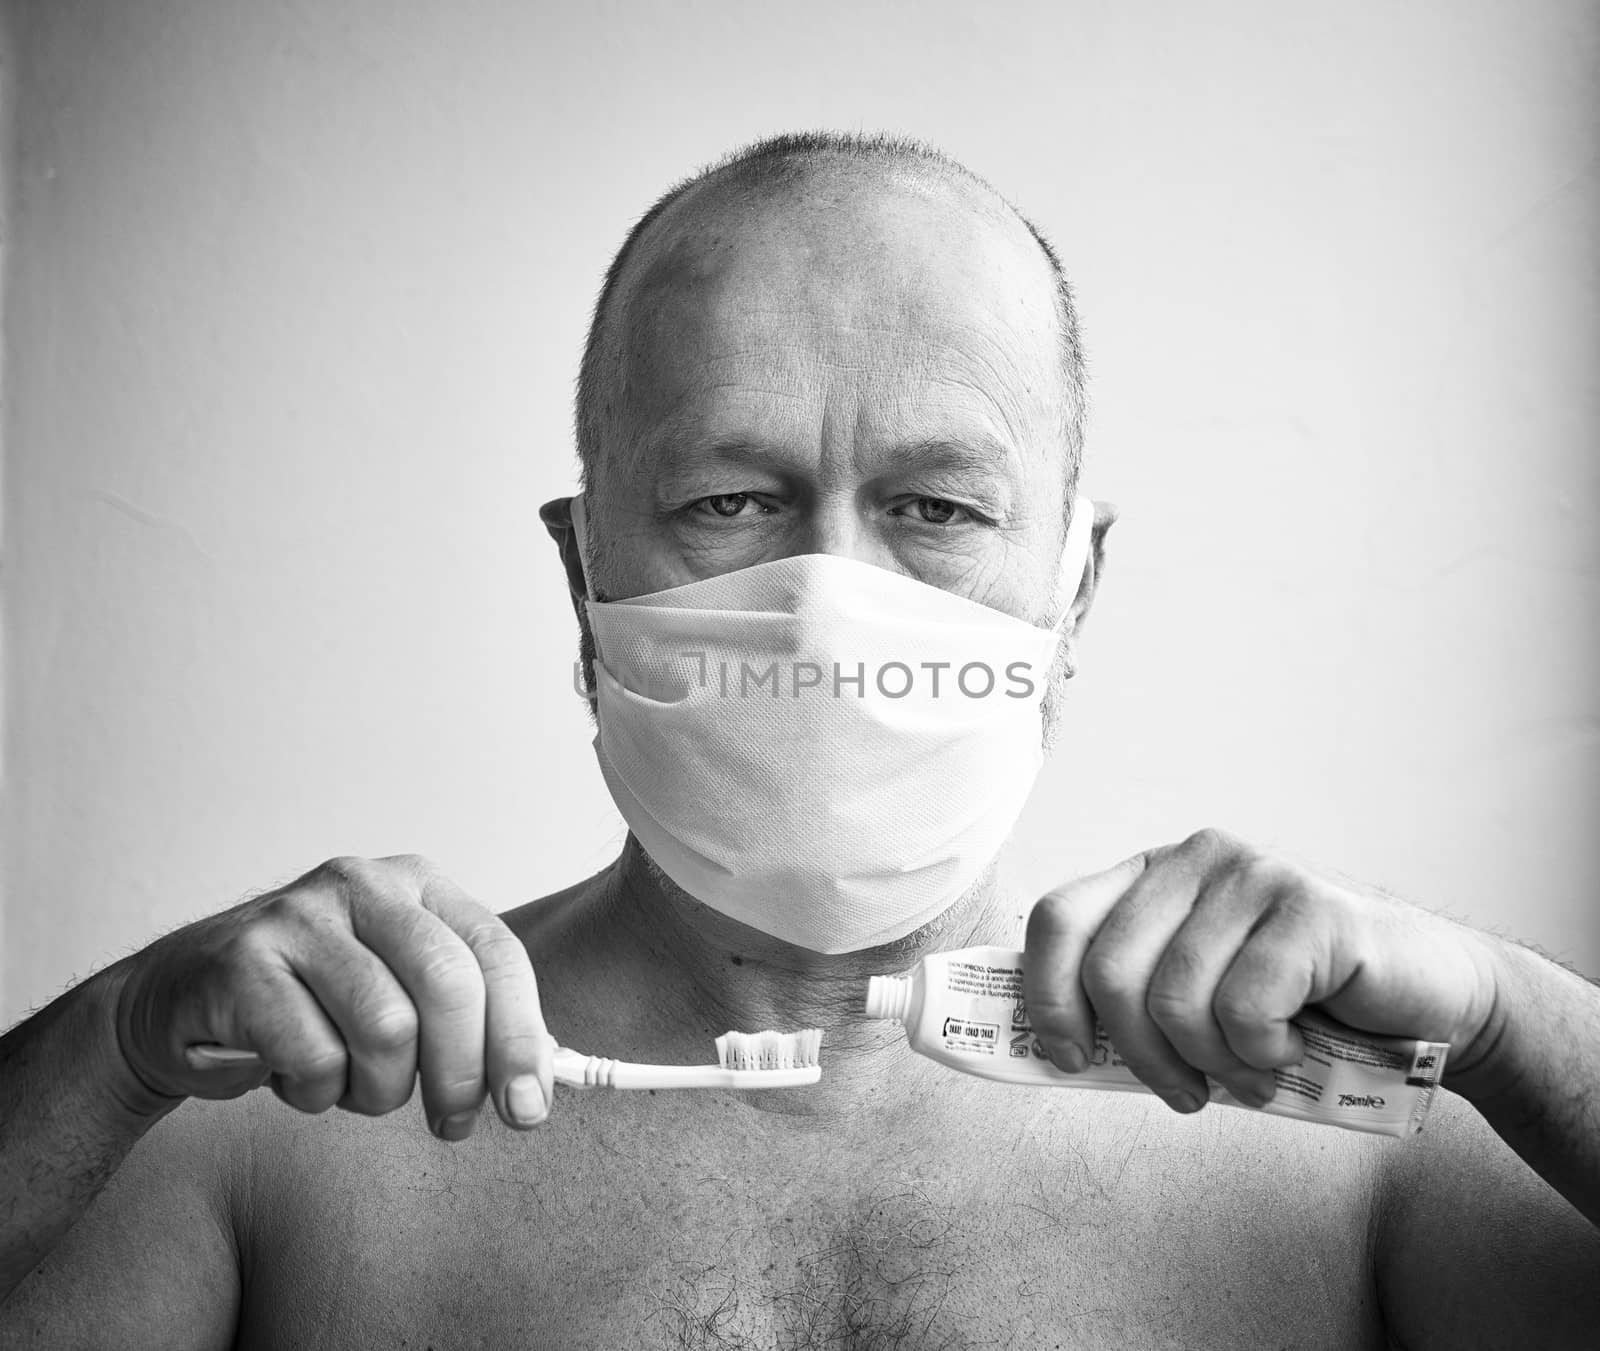 a man brushes his teeth with a protective mask during the coronavirus period